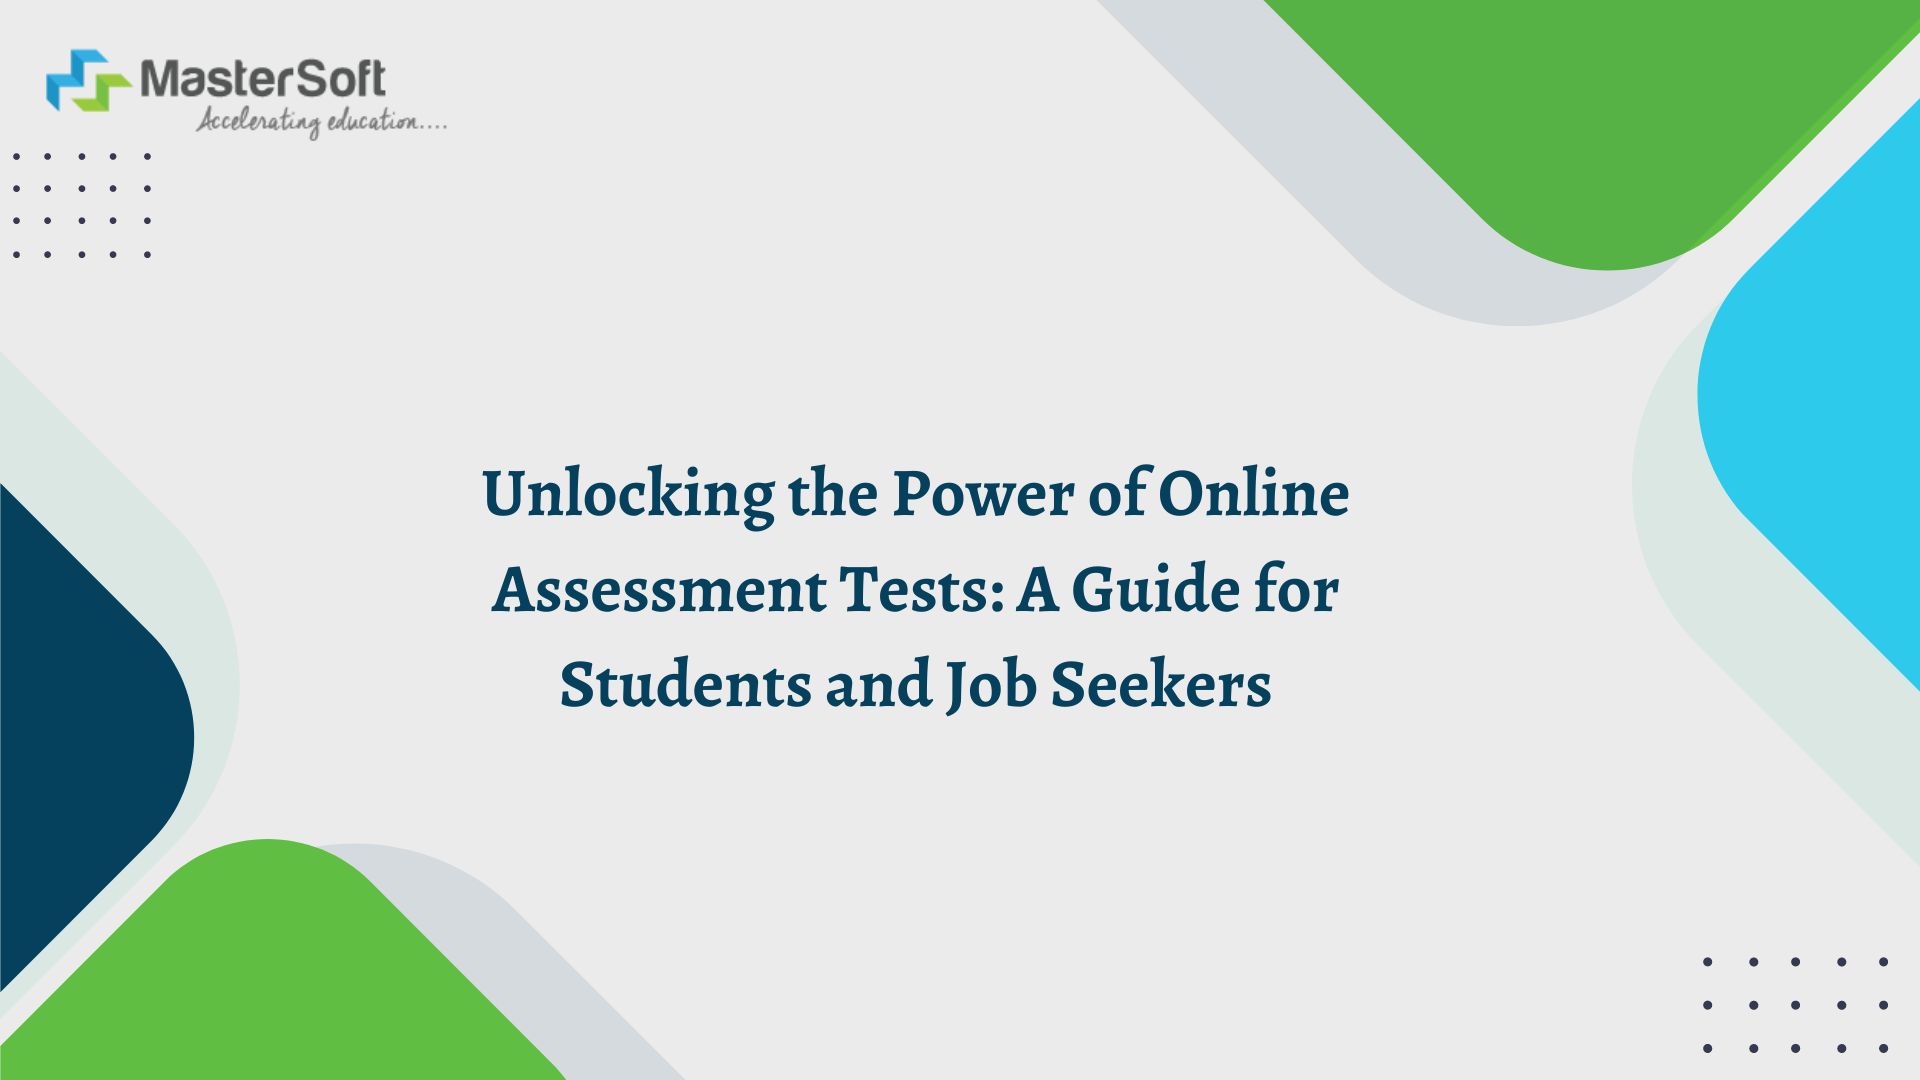 Unlocking the Power of Online Assessment Tests: A Guide for Students and Job Seekers